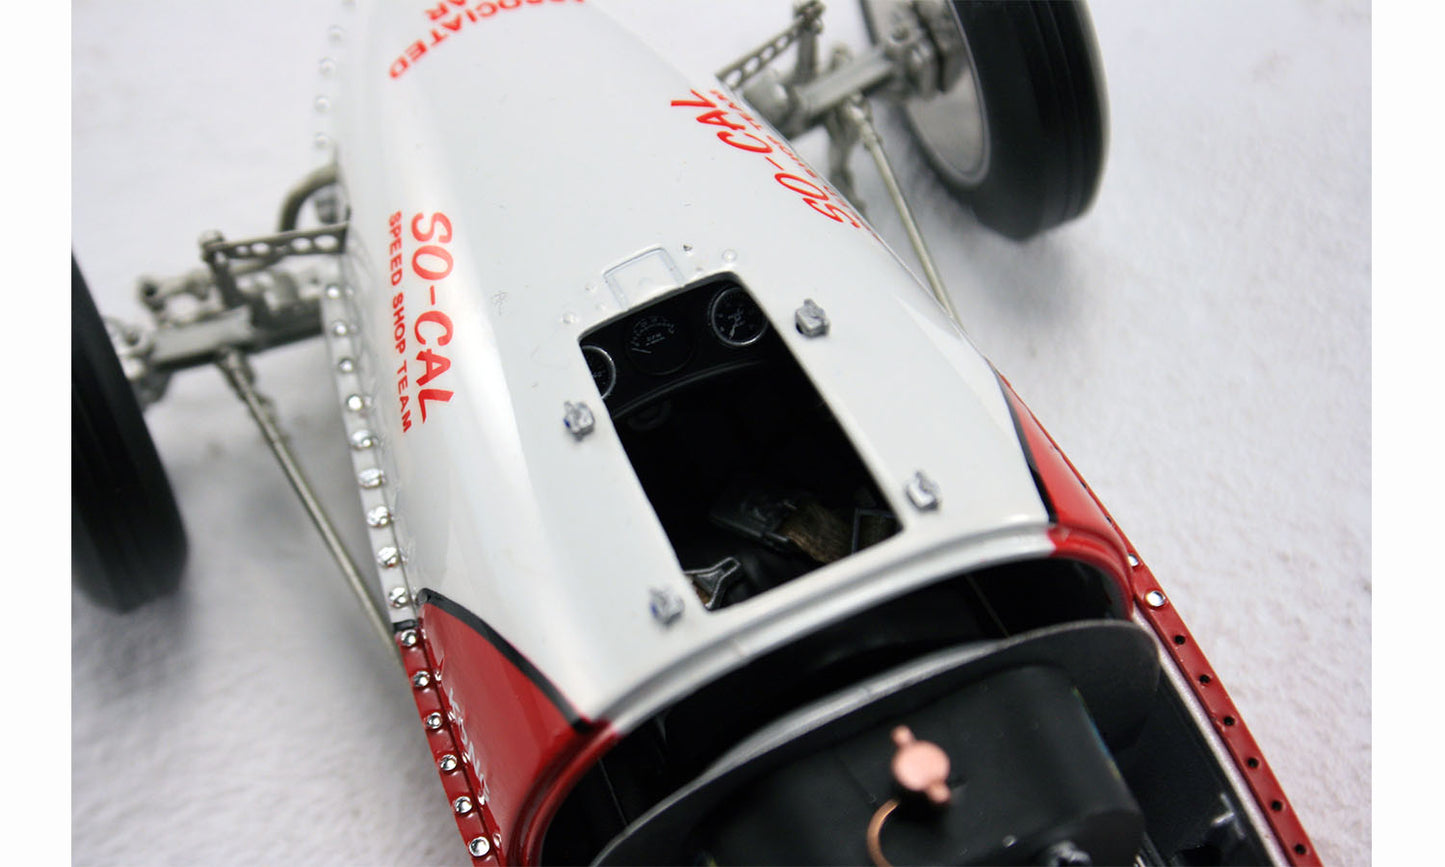 So Cal Speed Shop Belly Tank Racer